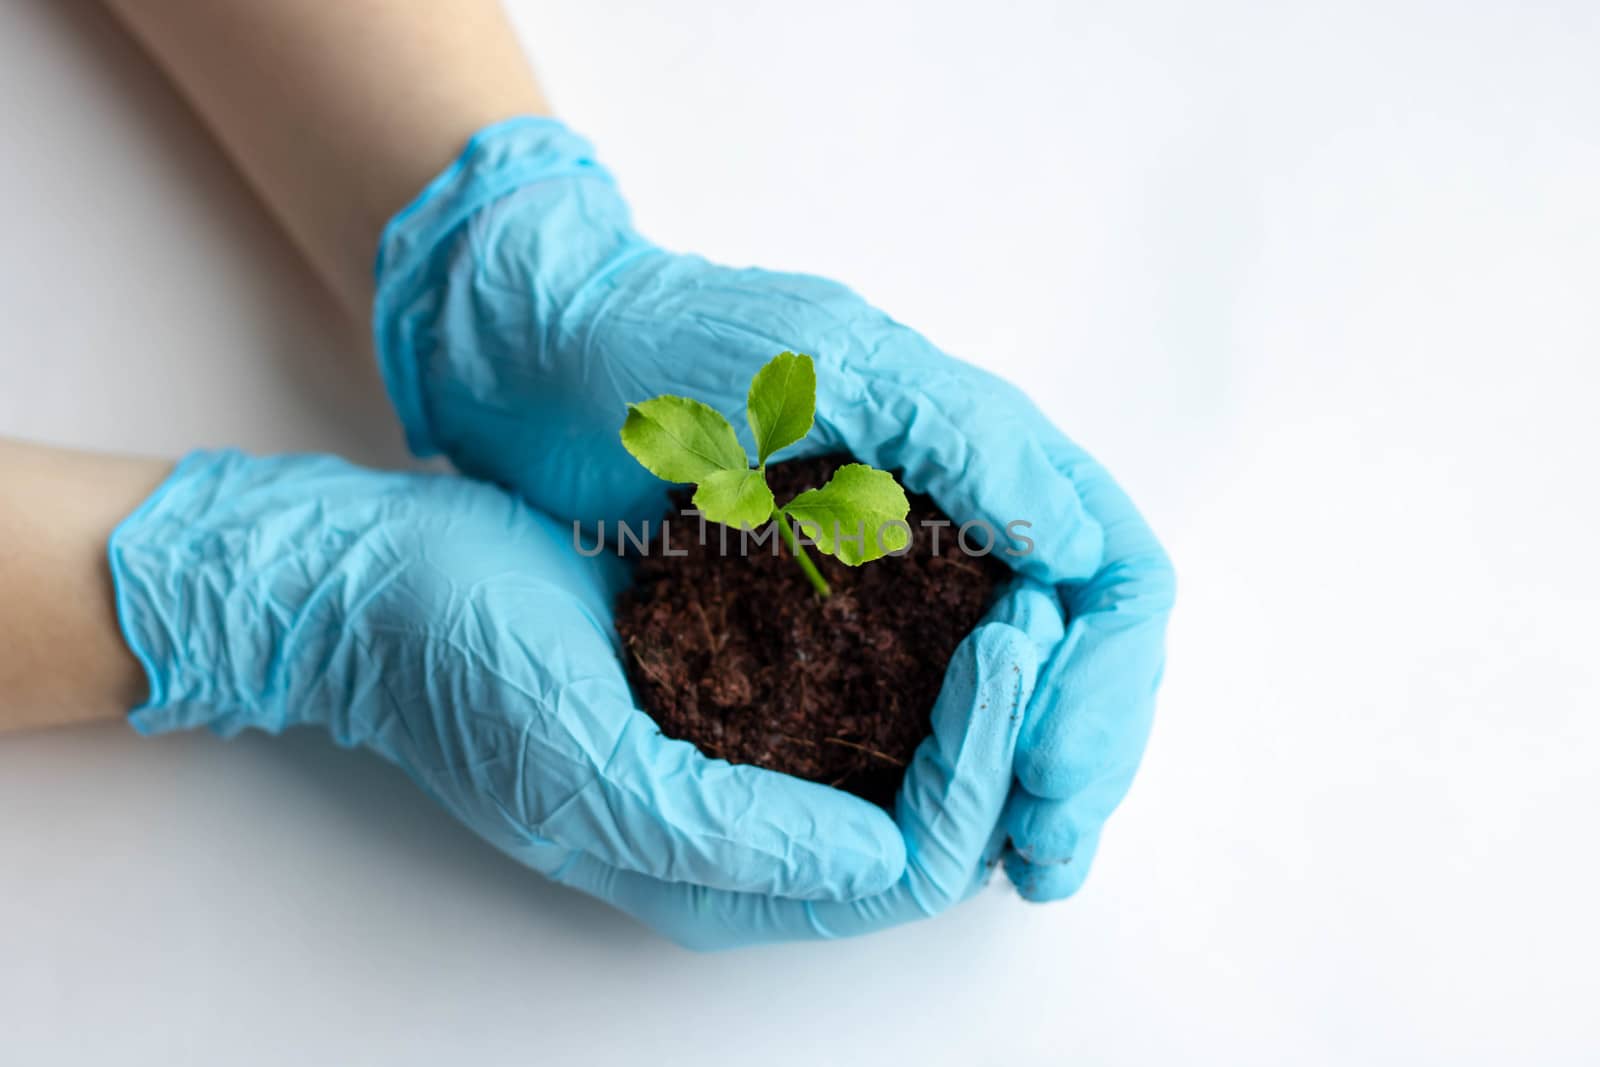 Hands holding and caring a green young plant